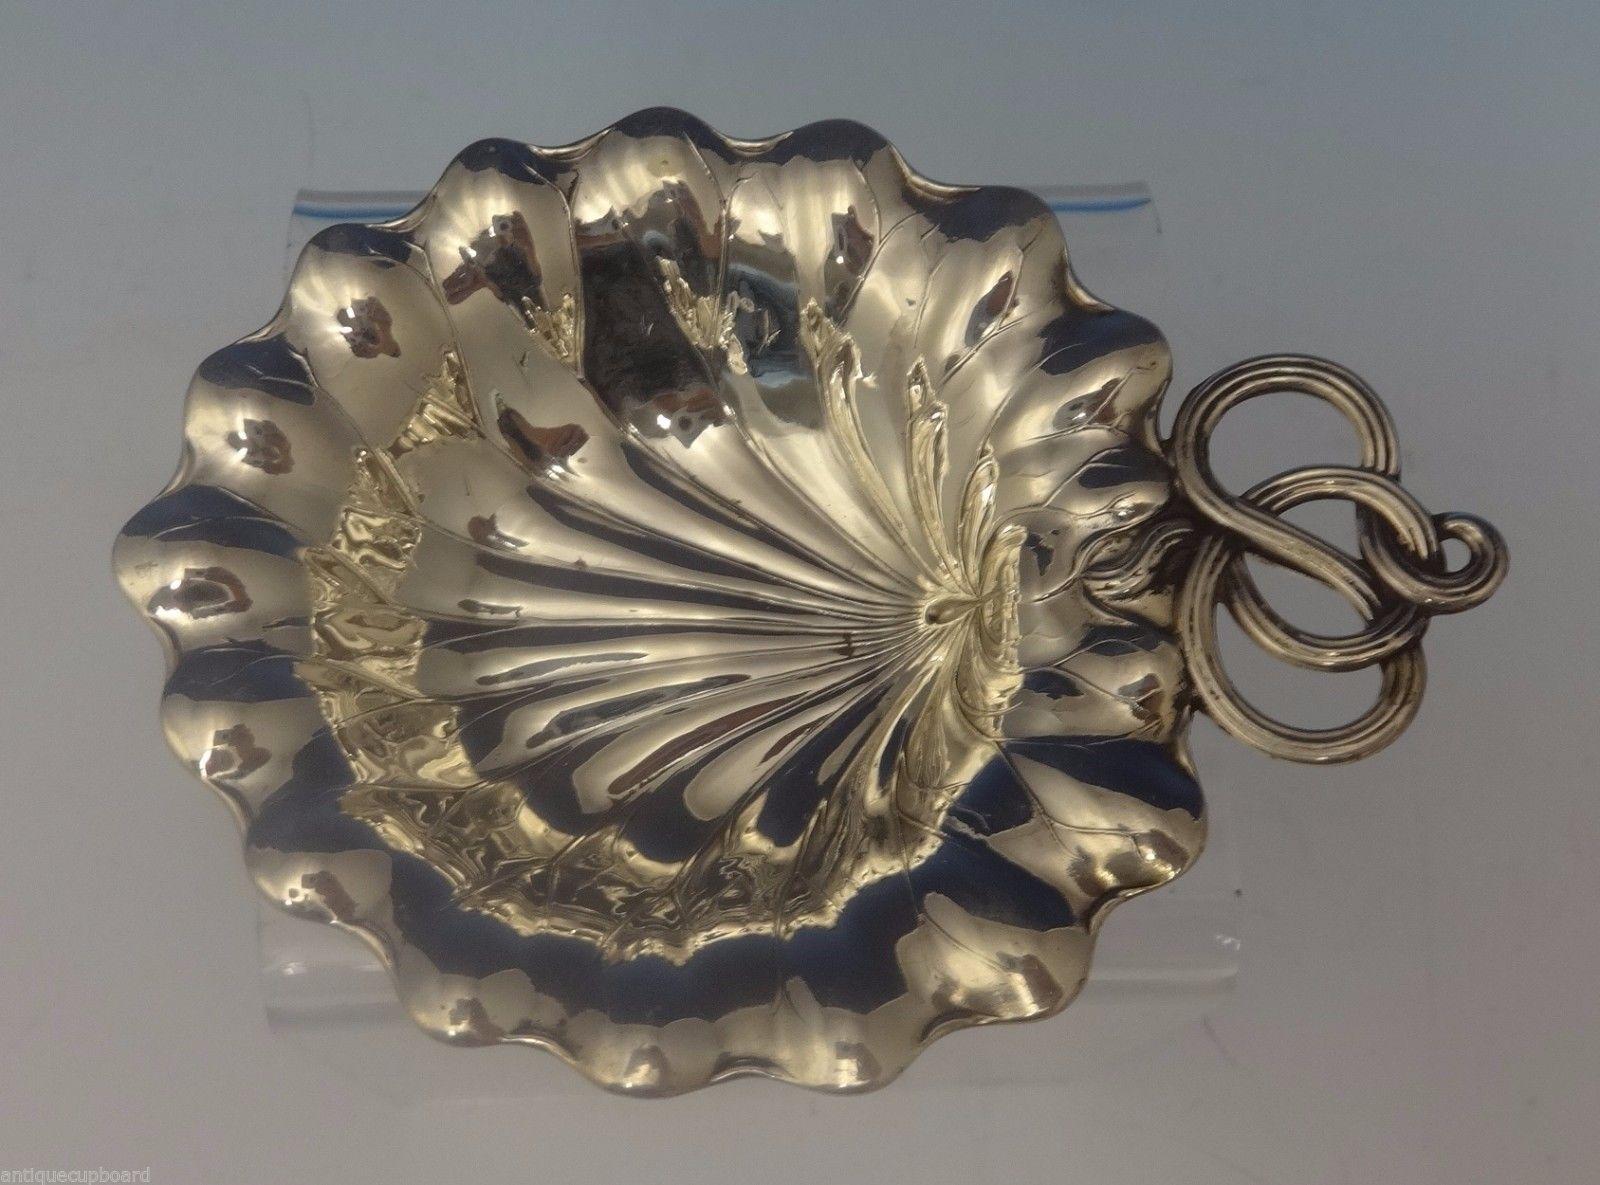 Gorham / Durgin
Gorham/Durgin sterling silver shell shape nut/mint dish and place card holder combination. It is marked with #5B. The measurements for the holder are 3/8 tall, 3 wide, and it weighs .9 ozt. It is not monogrammed and is in excellent